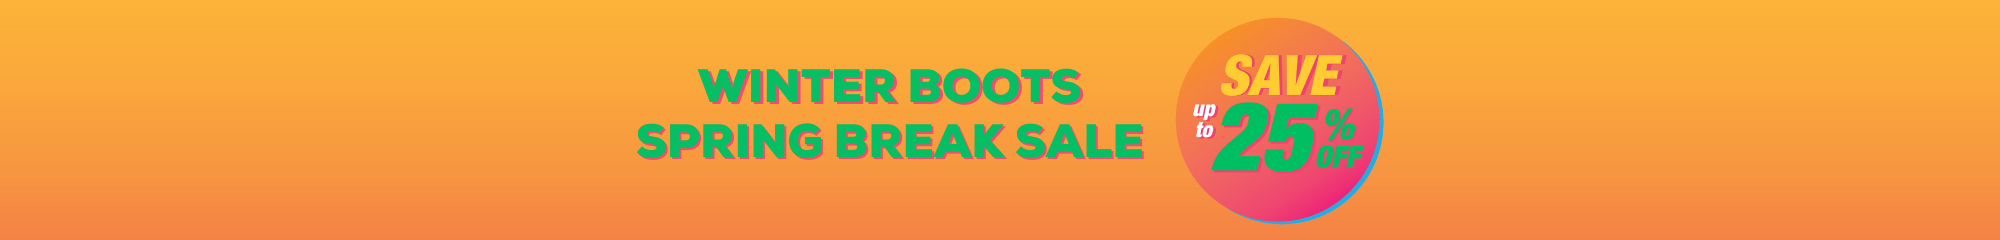 Winter Boots up to 25% Off